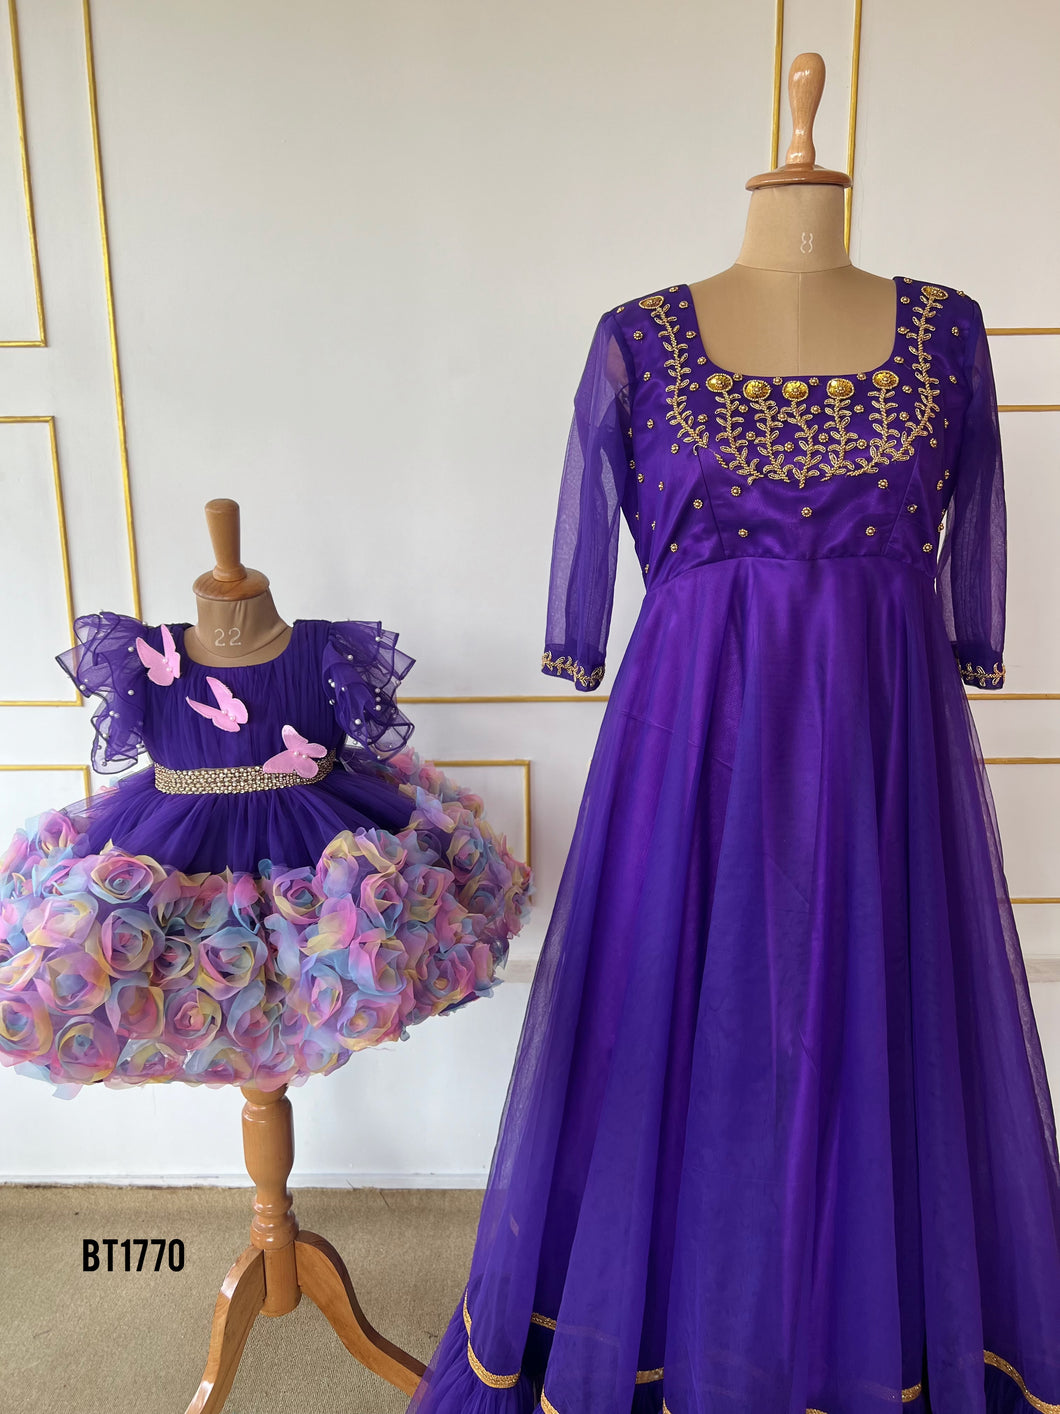 BT1770 Royal Bloom: Princess-Inspired Mommy & Me Gown Set